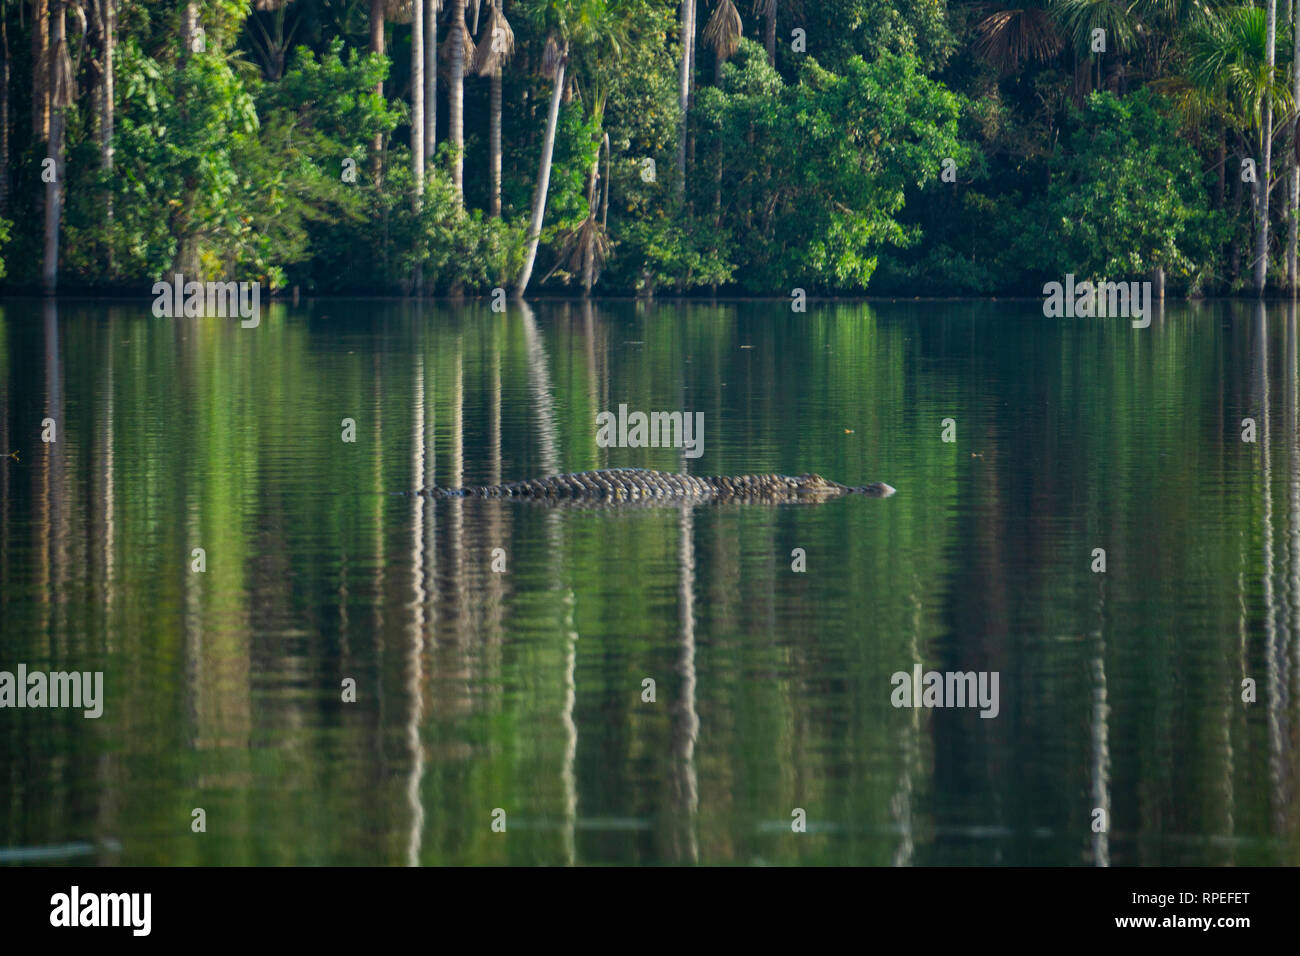 Caiman peeks out over surface of water in Amazon jungle lake. Stock Photo